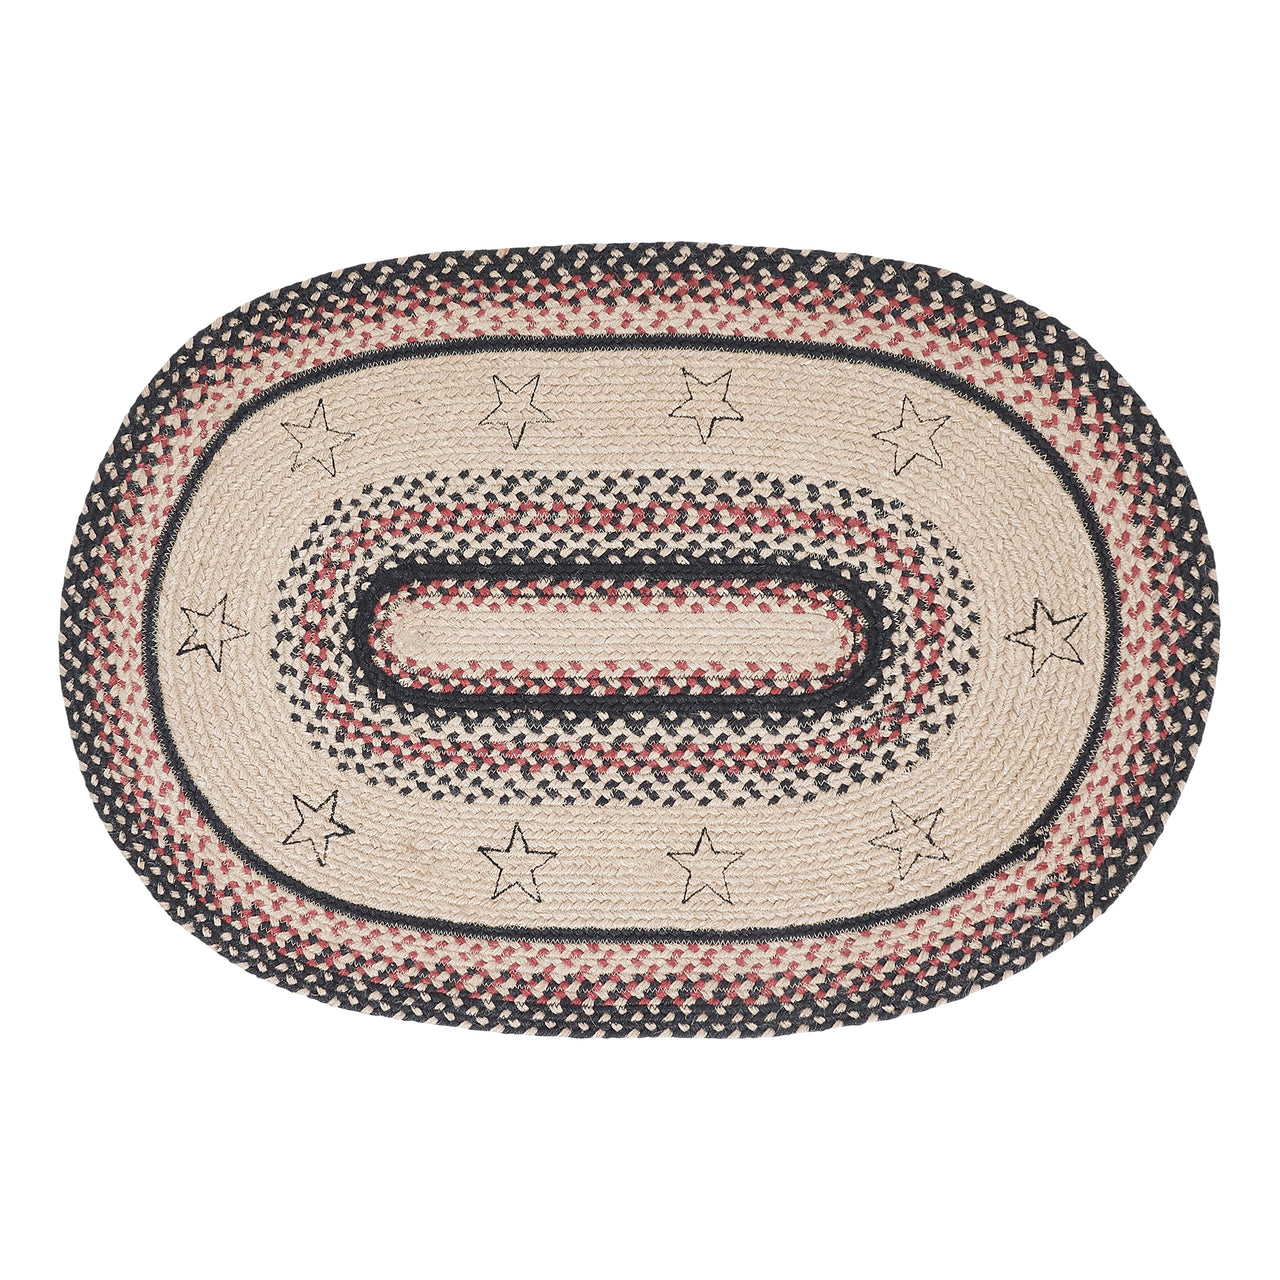 Colonial Star Jute Braided Rug Oval with Rug Pad 2'x3' VHC Brands